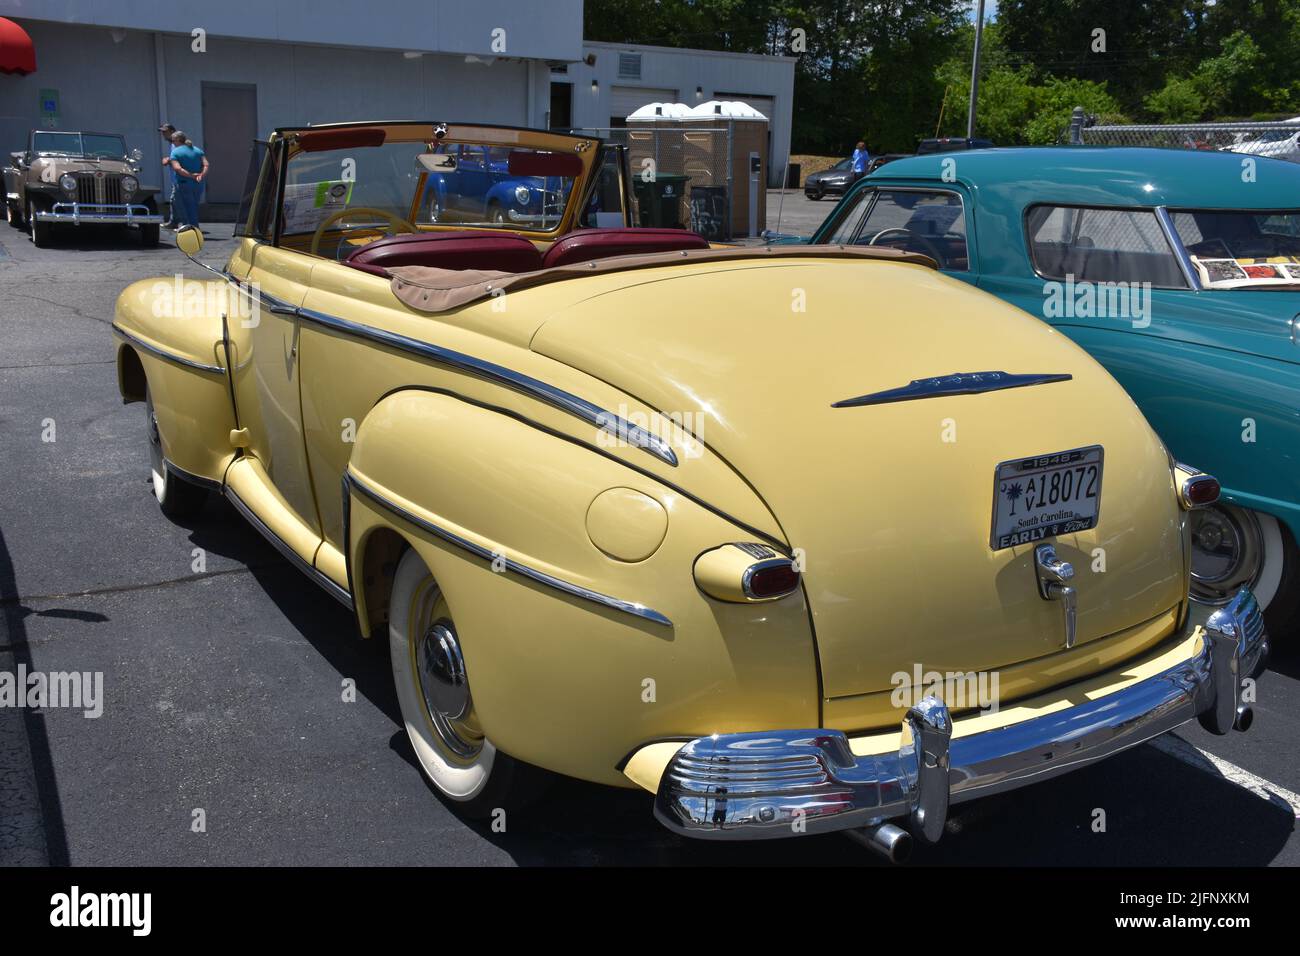 A 1948 Ford V8 Convertible on display at a car show. Stock Photo